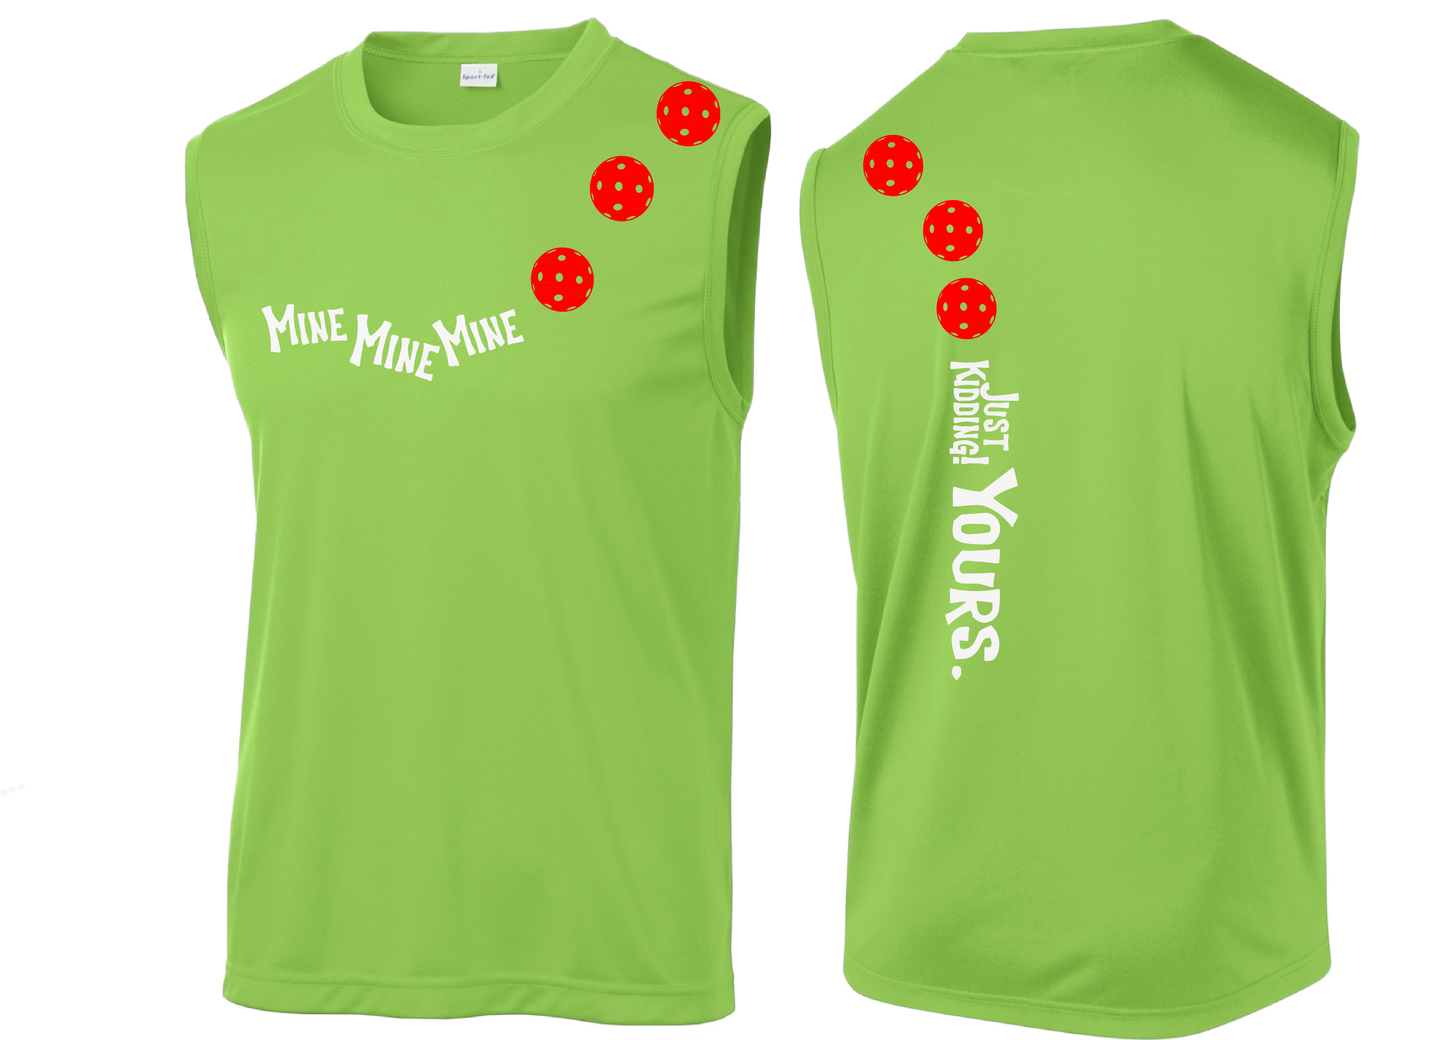 Mine JK Yours (Pickleball Colors Orange Yellow or Red) | Men's Sleeveless Athletic Shirt | 100% Polyester